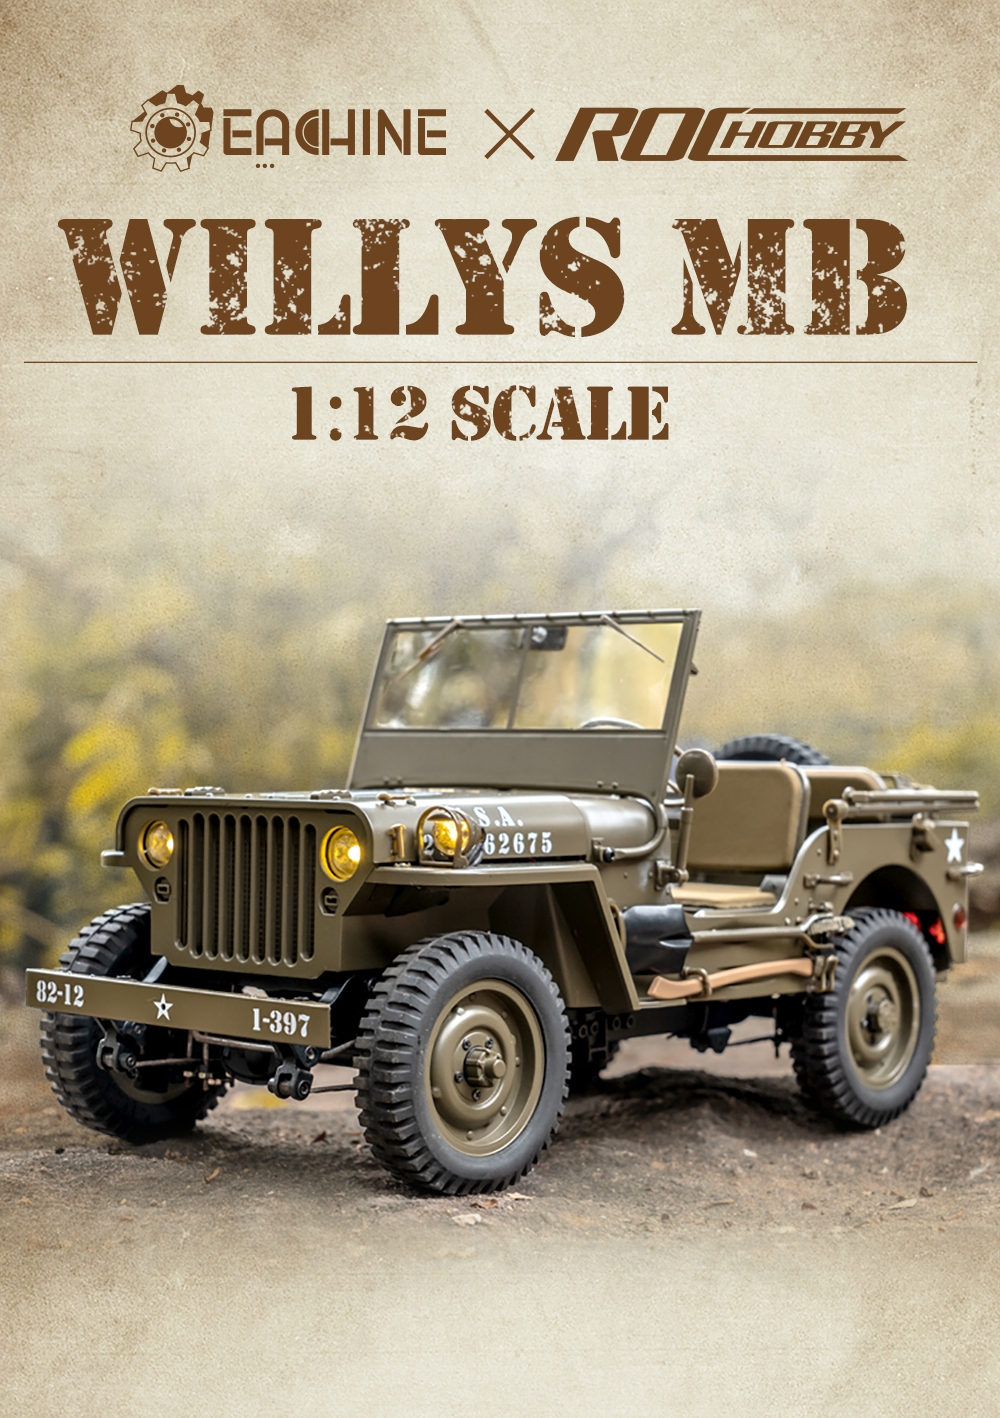 266.79 FOr Eachine Rochobby 1941 Willys MB 1/12 RC Car with Two Batteries RC Off-Road Crawler RTR RC Army Truck with LED Lights 2-Speed Gearshift and Remote Control